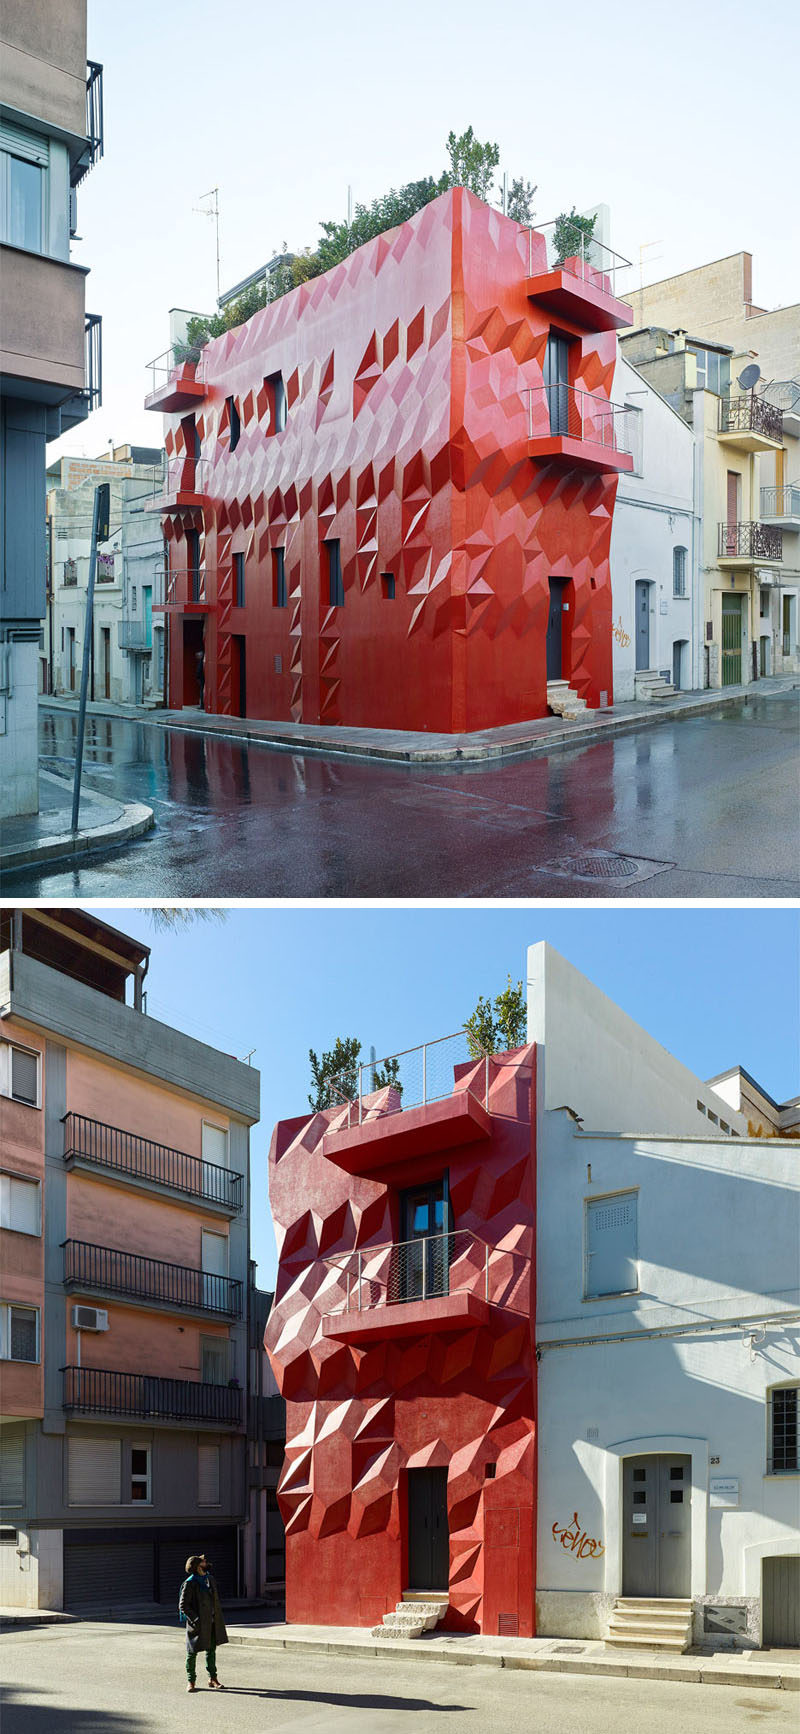 11 Red Houses And Buildings That Aren't Afraid To Make A Statement // 3D diamonds seem to pop off the exterior of this bright red building and make it stand out from its neighbours even more.